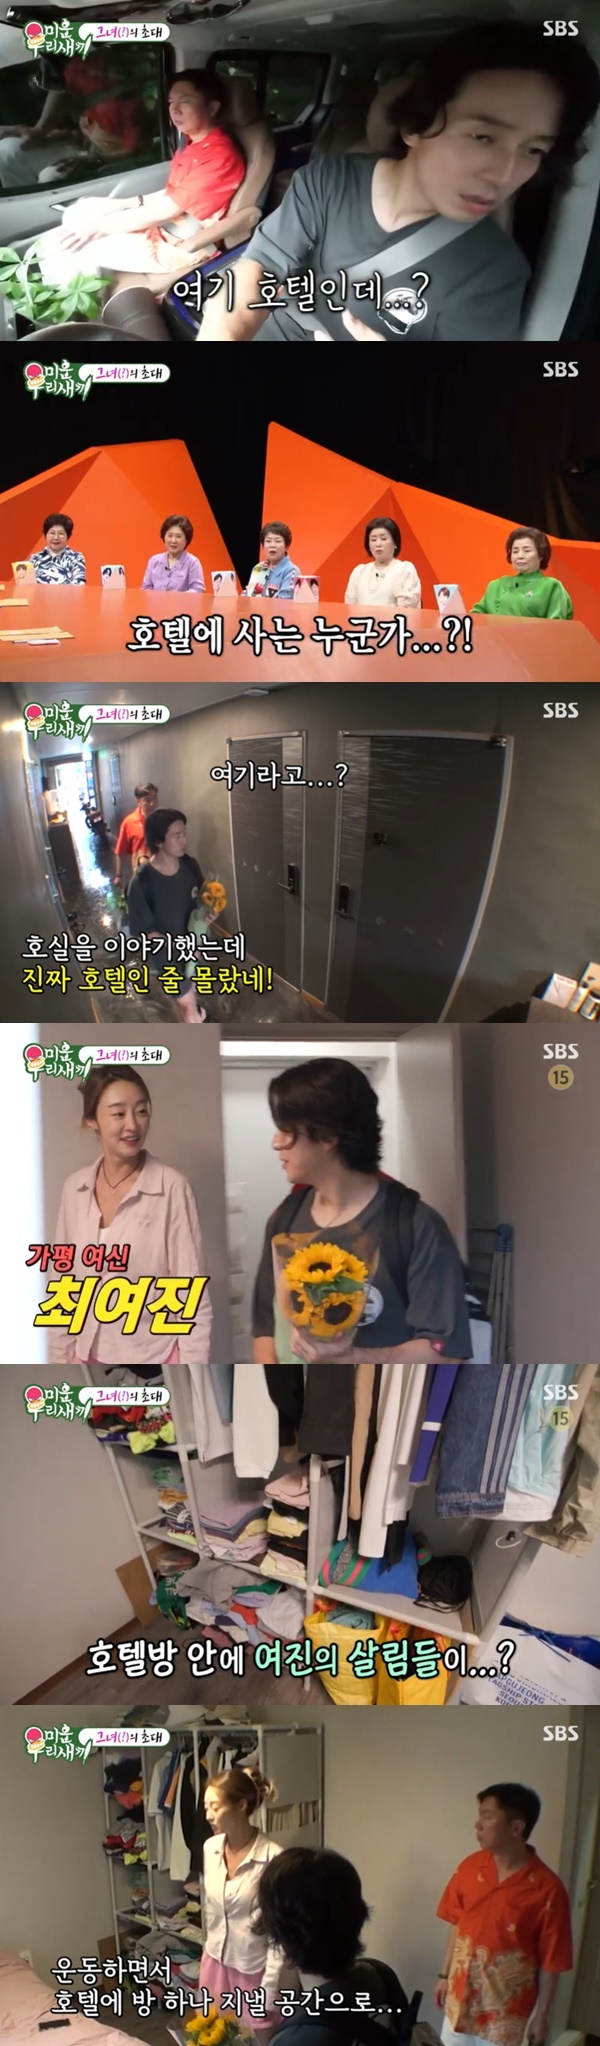 Choi Yeo-jin unveils Cheongshim International Academy hotel.On August 13, SBS  ⁇  My Little Old Boy  ⁇ , Im Won-hee, Hyeonghwan went to Cheongshim International Academys house in Choi Yeo-jin.Im Won-hee, hyeonghwan went to somewhere with flowers. The destination is Cheongshim International Academys house in Choi Yeo-jin. Who is Choi Yeo-jin?He said, Why did you bring flowers? He said, Can you come with empty hands? What is it here? It says hotel.Choi Yeo-jin replied that he made a room for me to stay in while exercising. Im Won-hee laughed with a potted T-shirt with his face.Choi Yeo-jin writes that the  ⁇ Seoul house is a warehouse, and the water, sky, wind, clouds and flowers that are seen in nature are so good.It is so cool to see the fog rising in the morning and the sunrise, and explained Cheongshim International Academy.